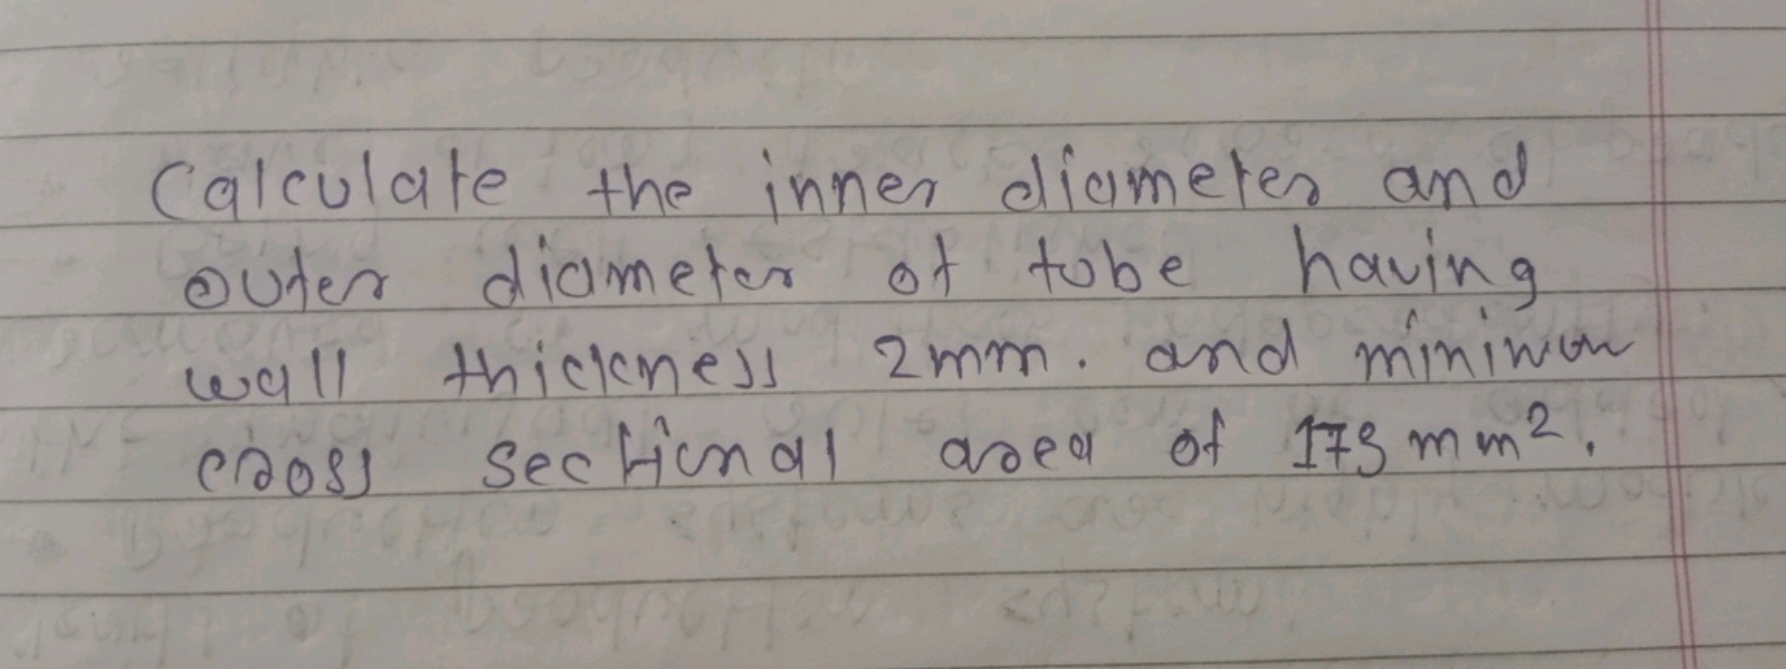 Calculate the inner diameter and outer diameter of tube having wall th